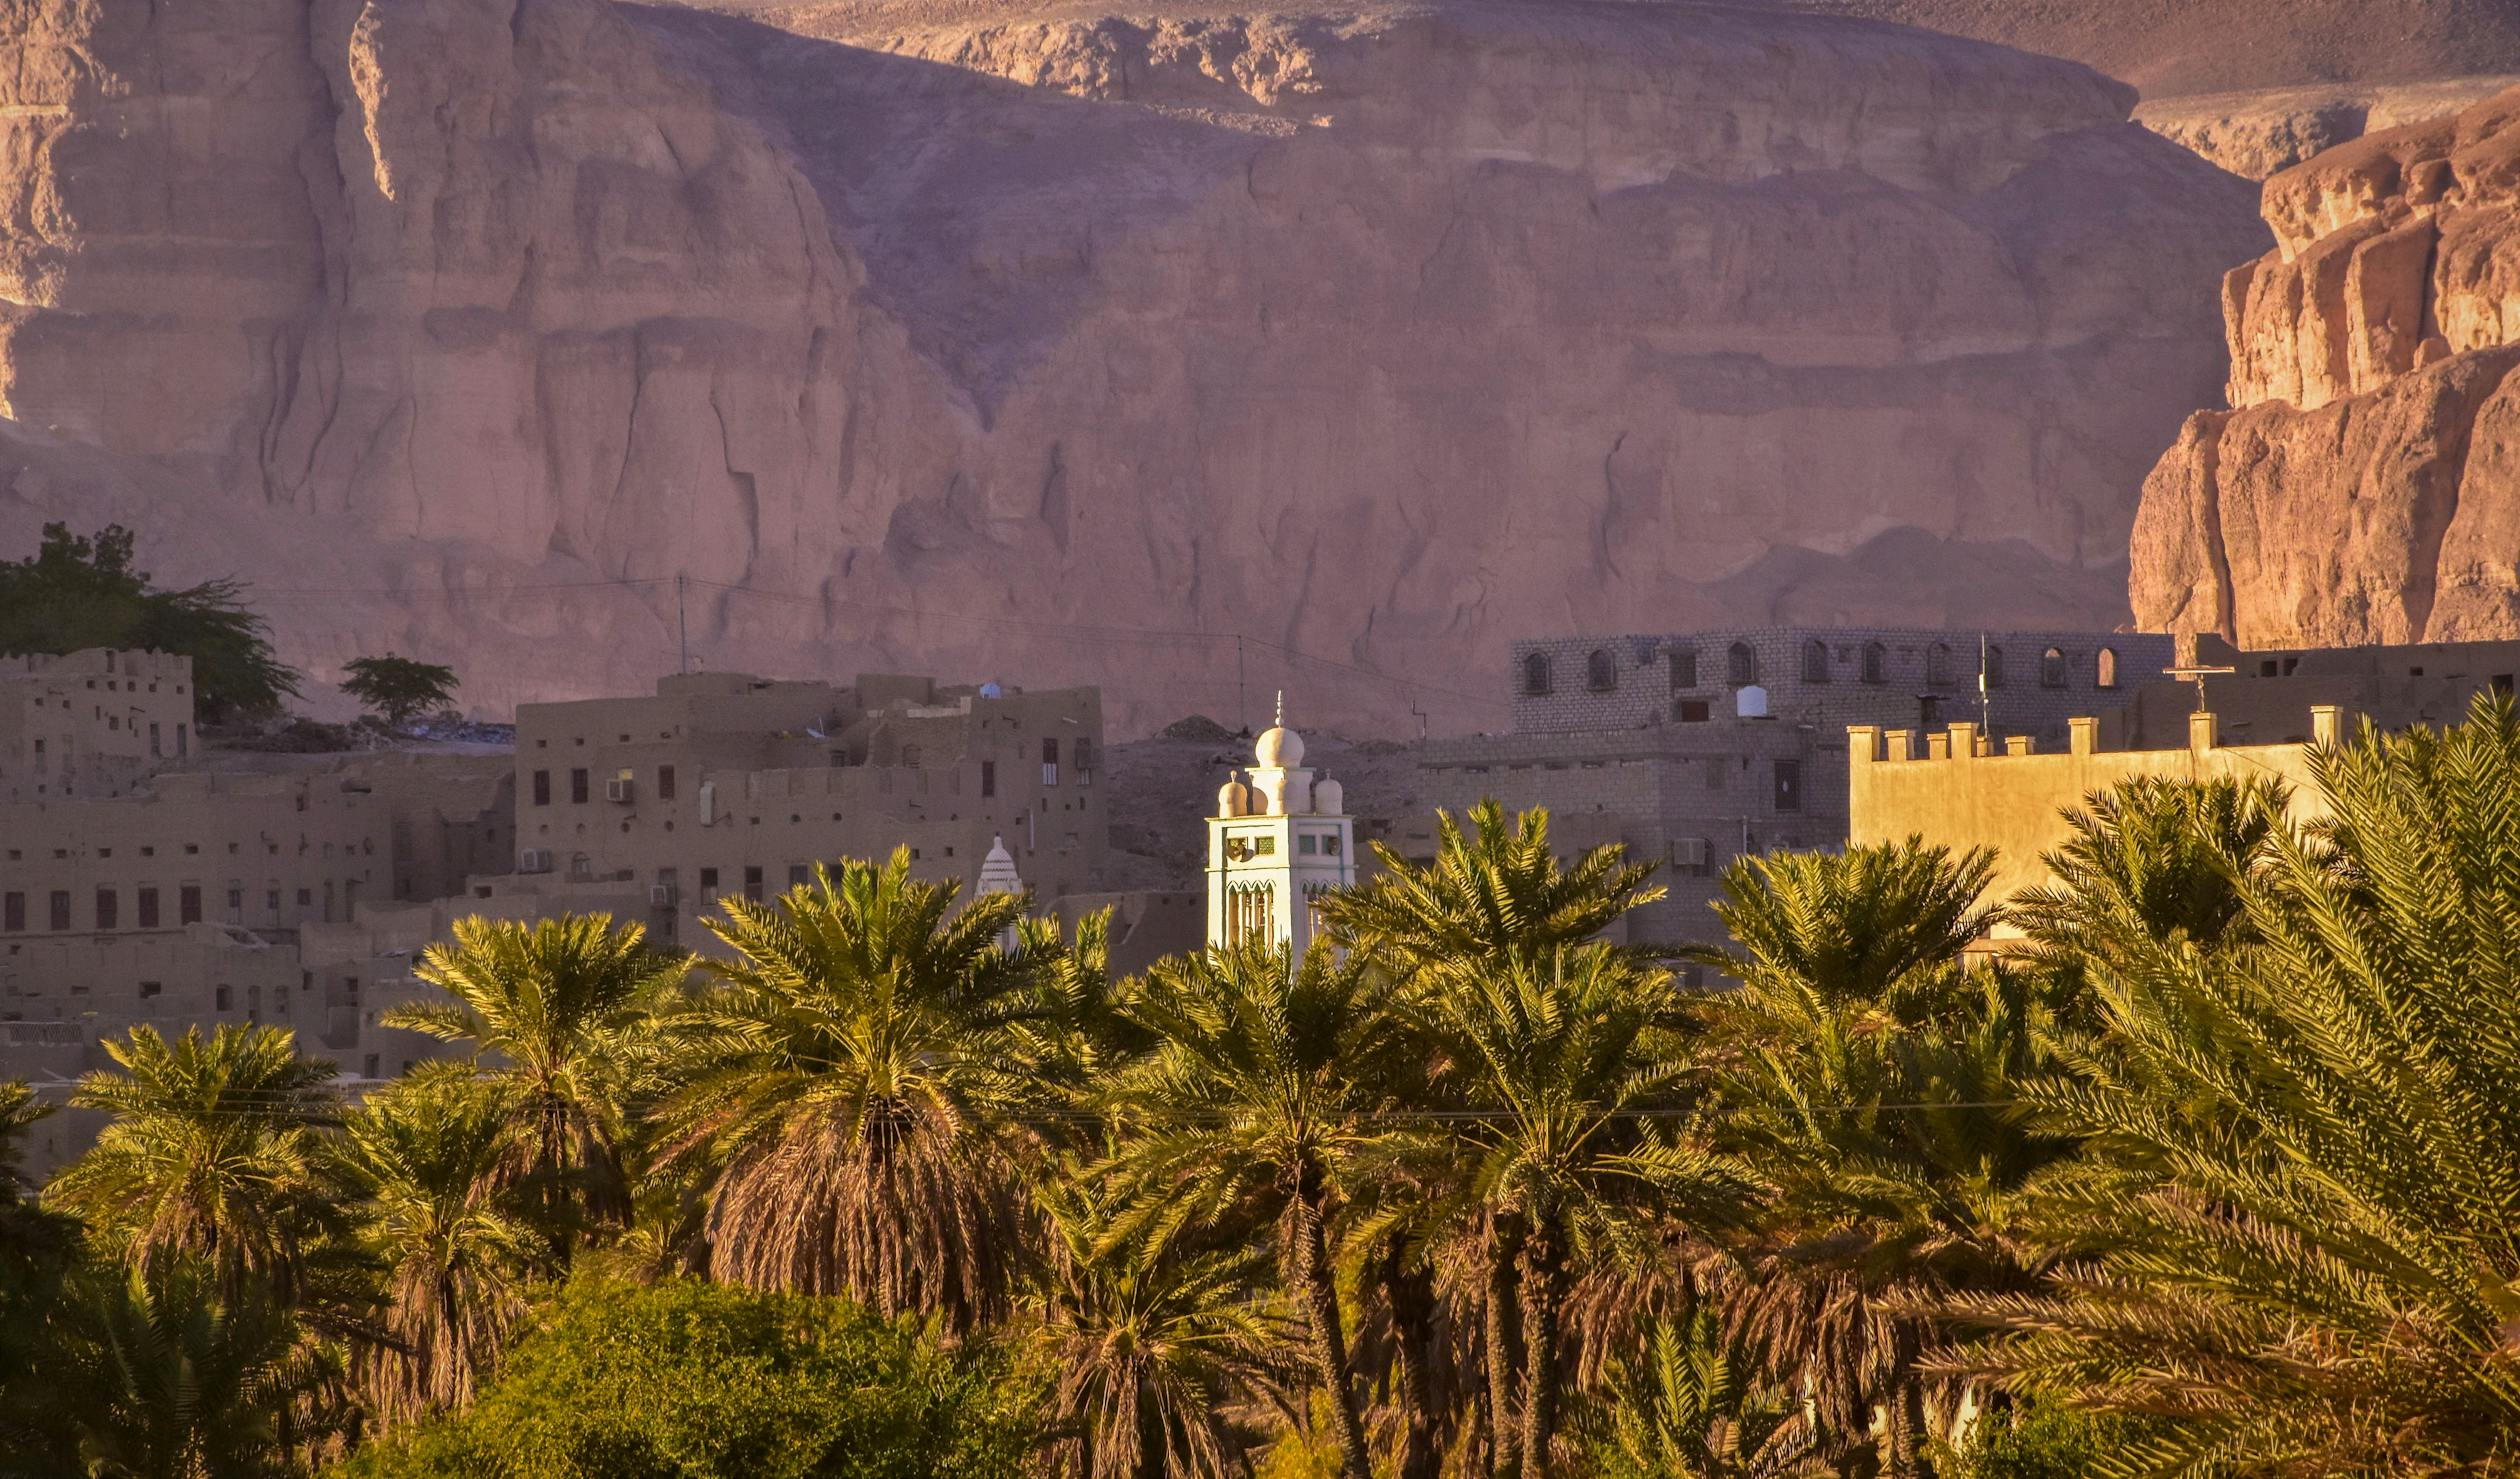 Yemen Photo by Mohammad Hadi from Pexels: https://www.pexels.com/photo/palm-trees-and-buildings-in-yemen-11201283/